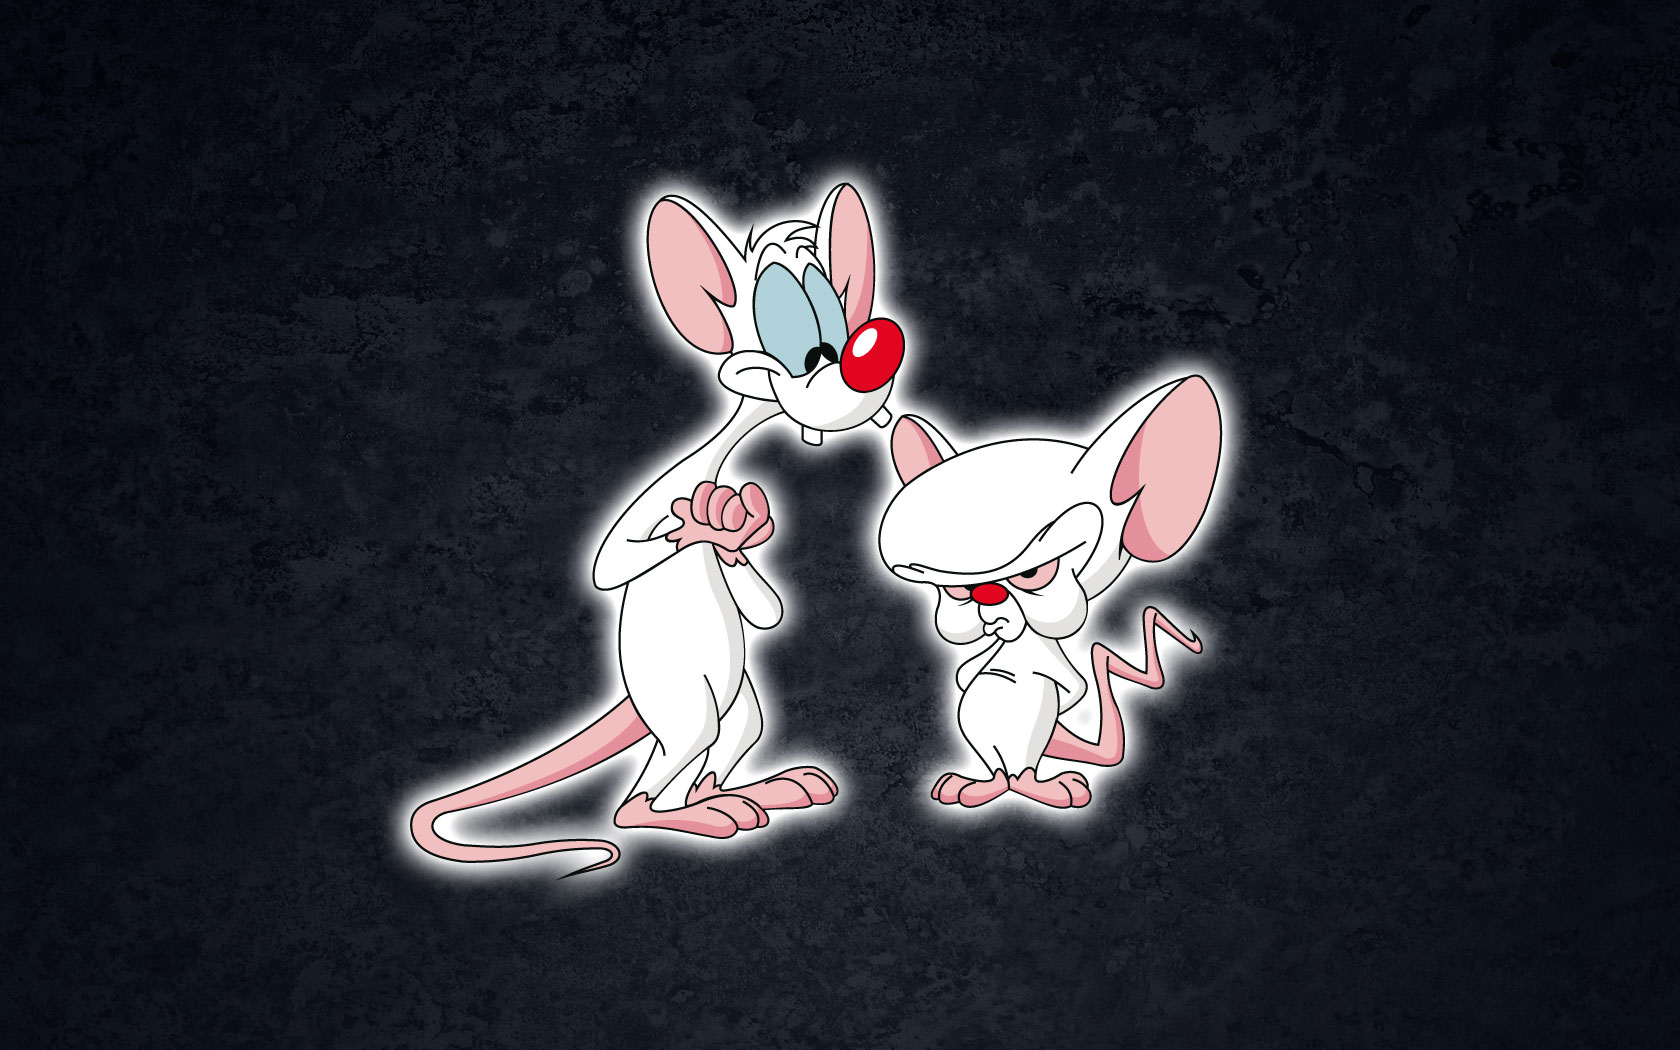 Pinky And The Brain Wallpapers